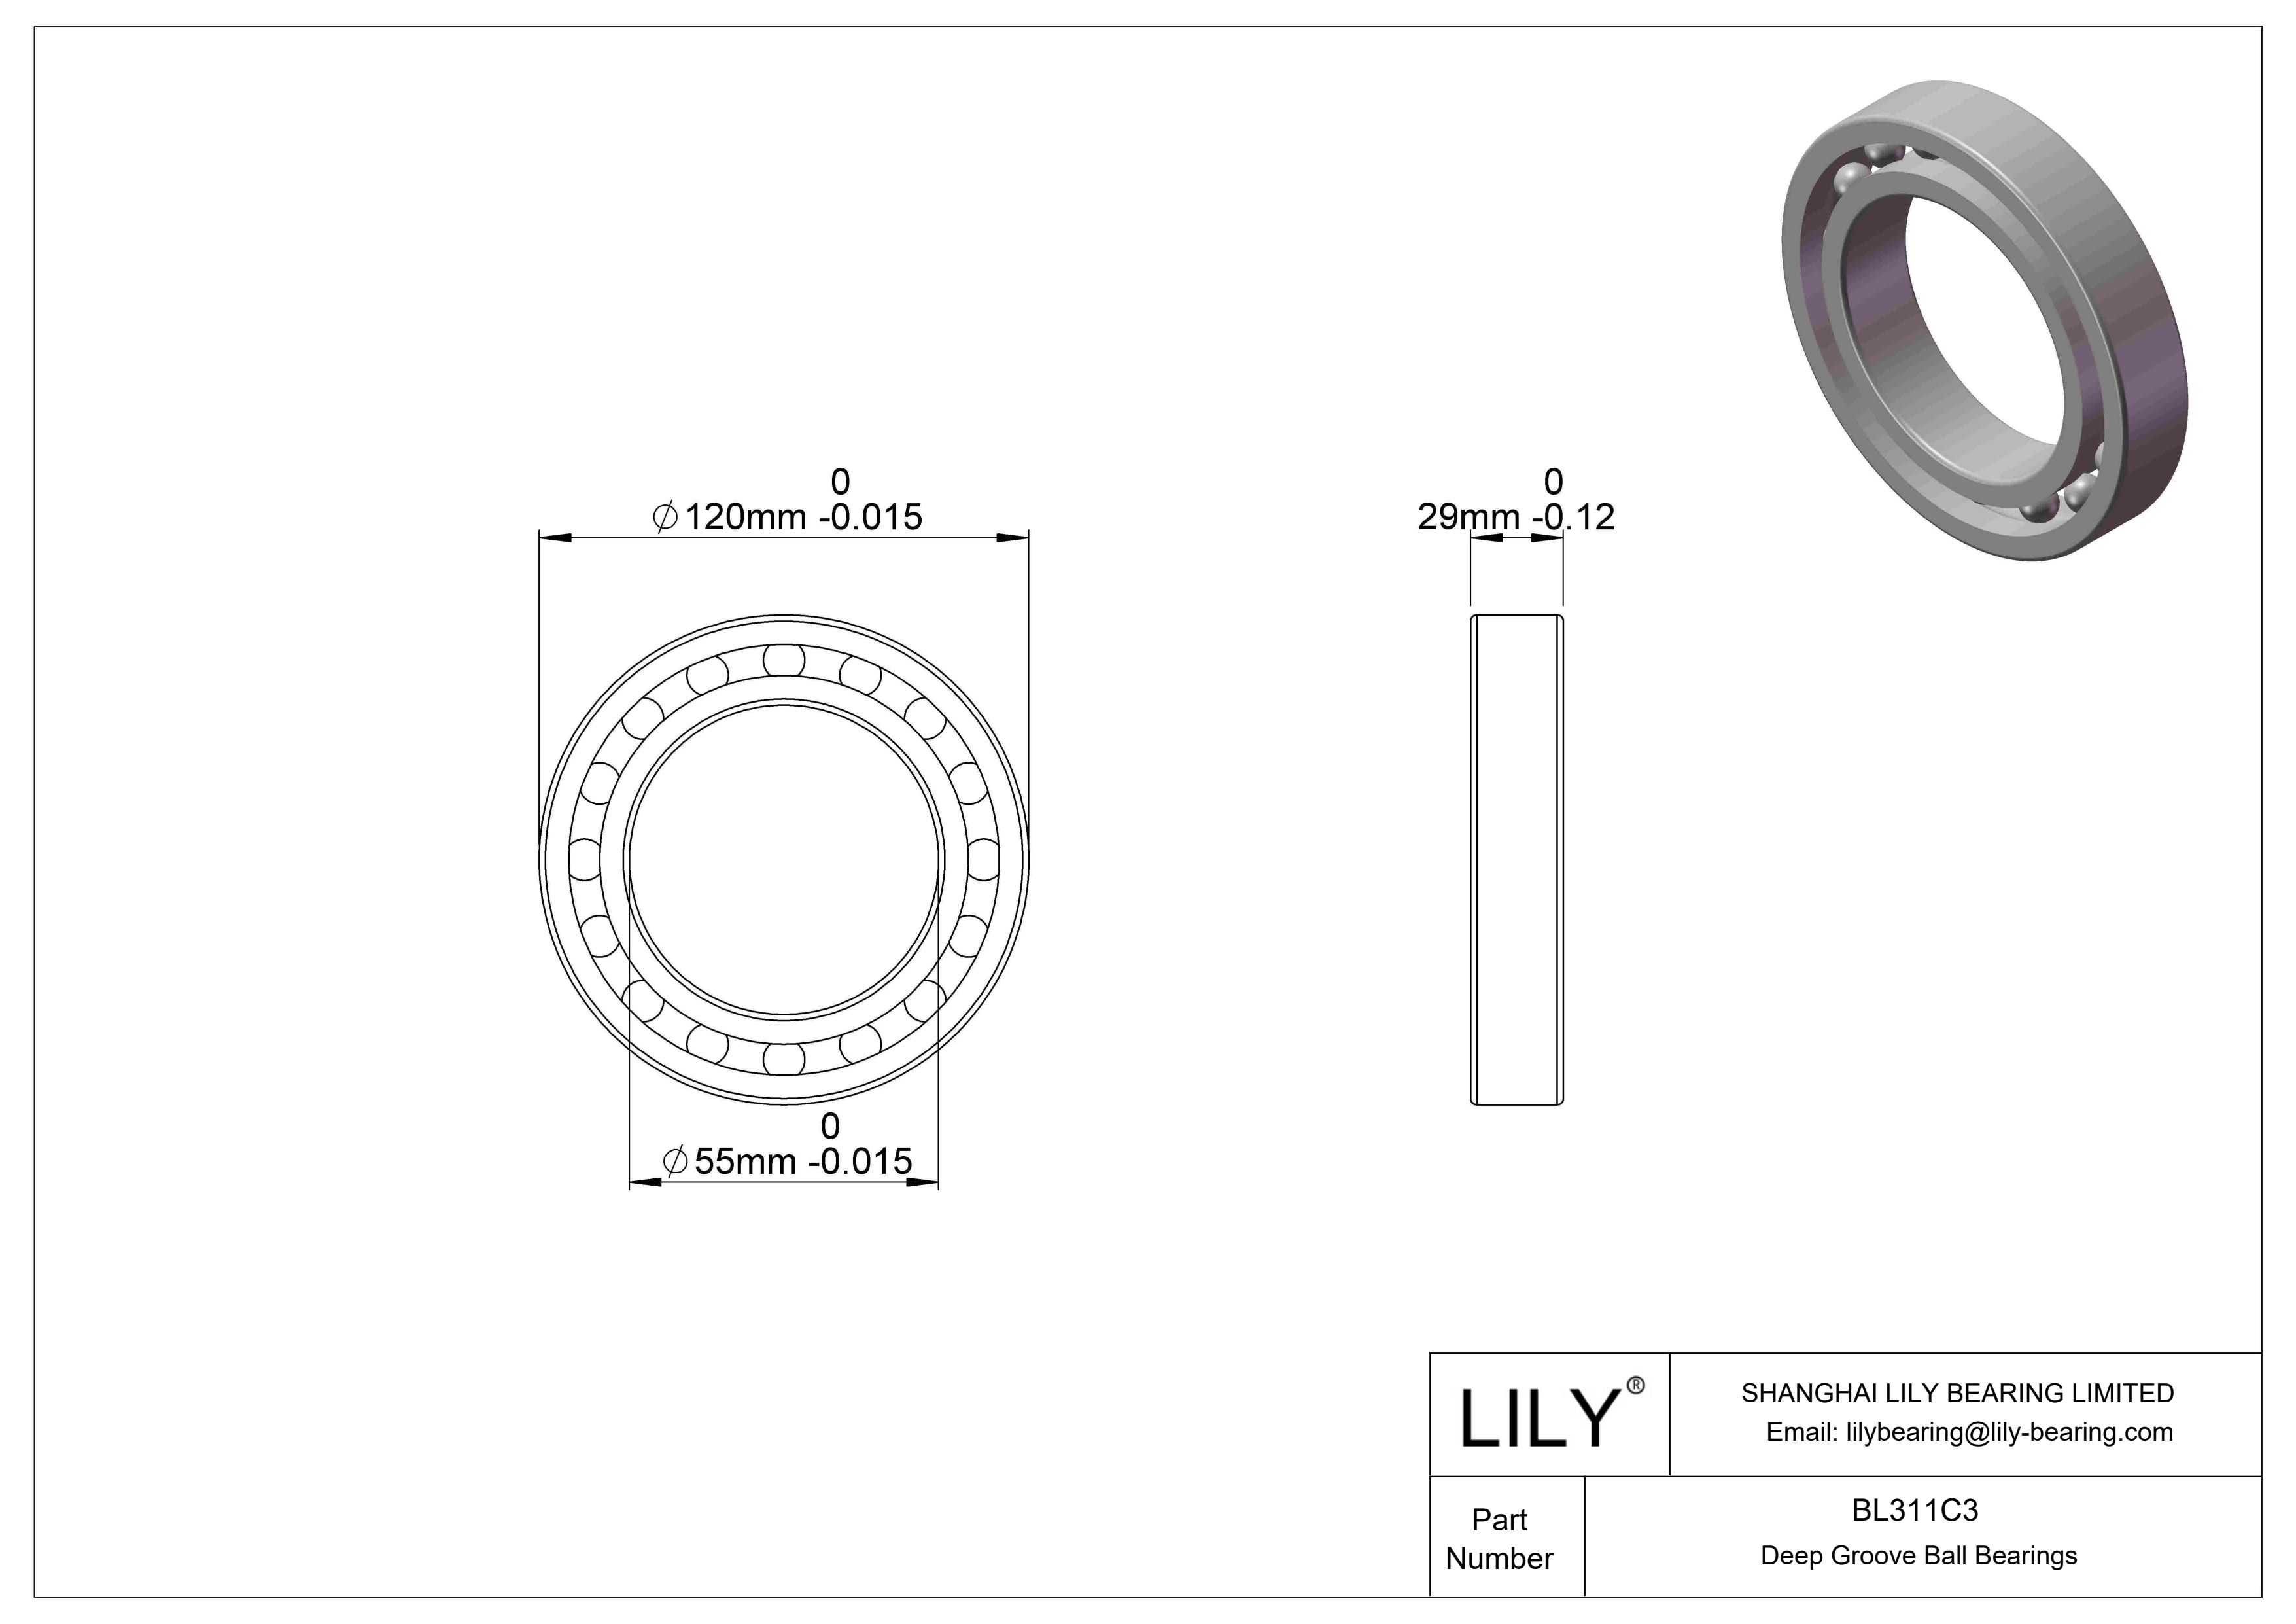 BL311C3 General Deep Groove Ball Bearing cad drawing